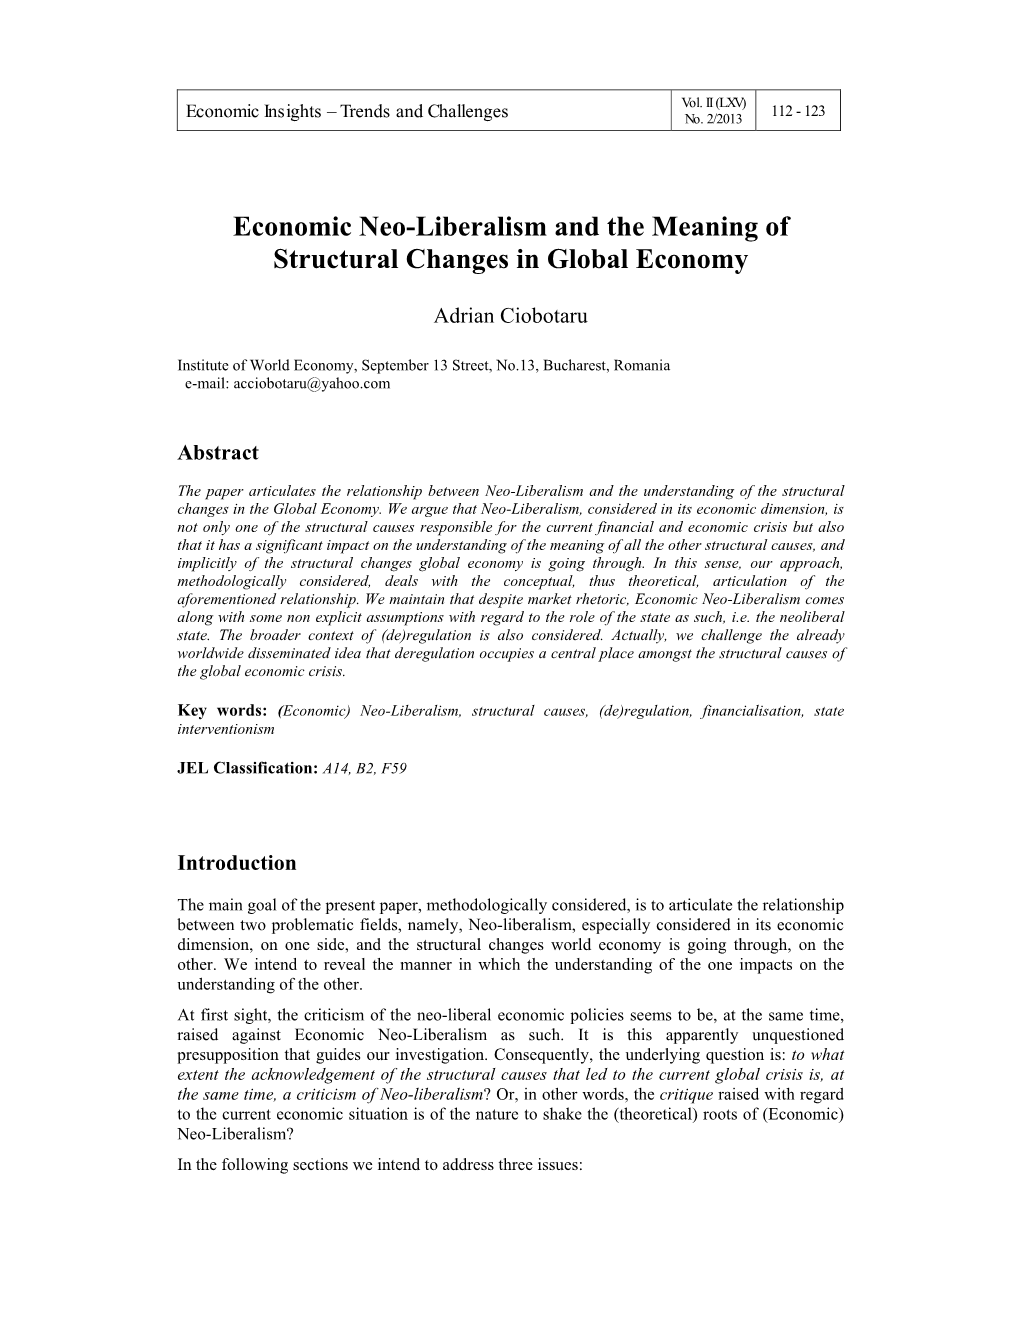 Economic Neo-Liberalism and the Meaning of Structural Changes in Global Economy